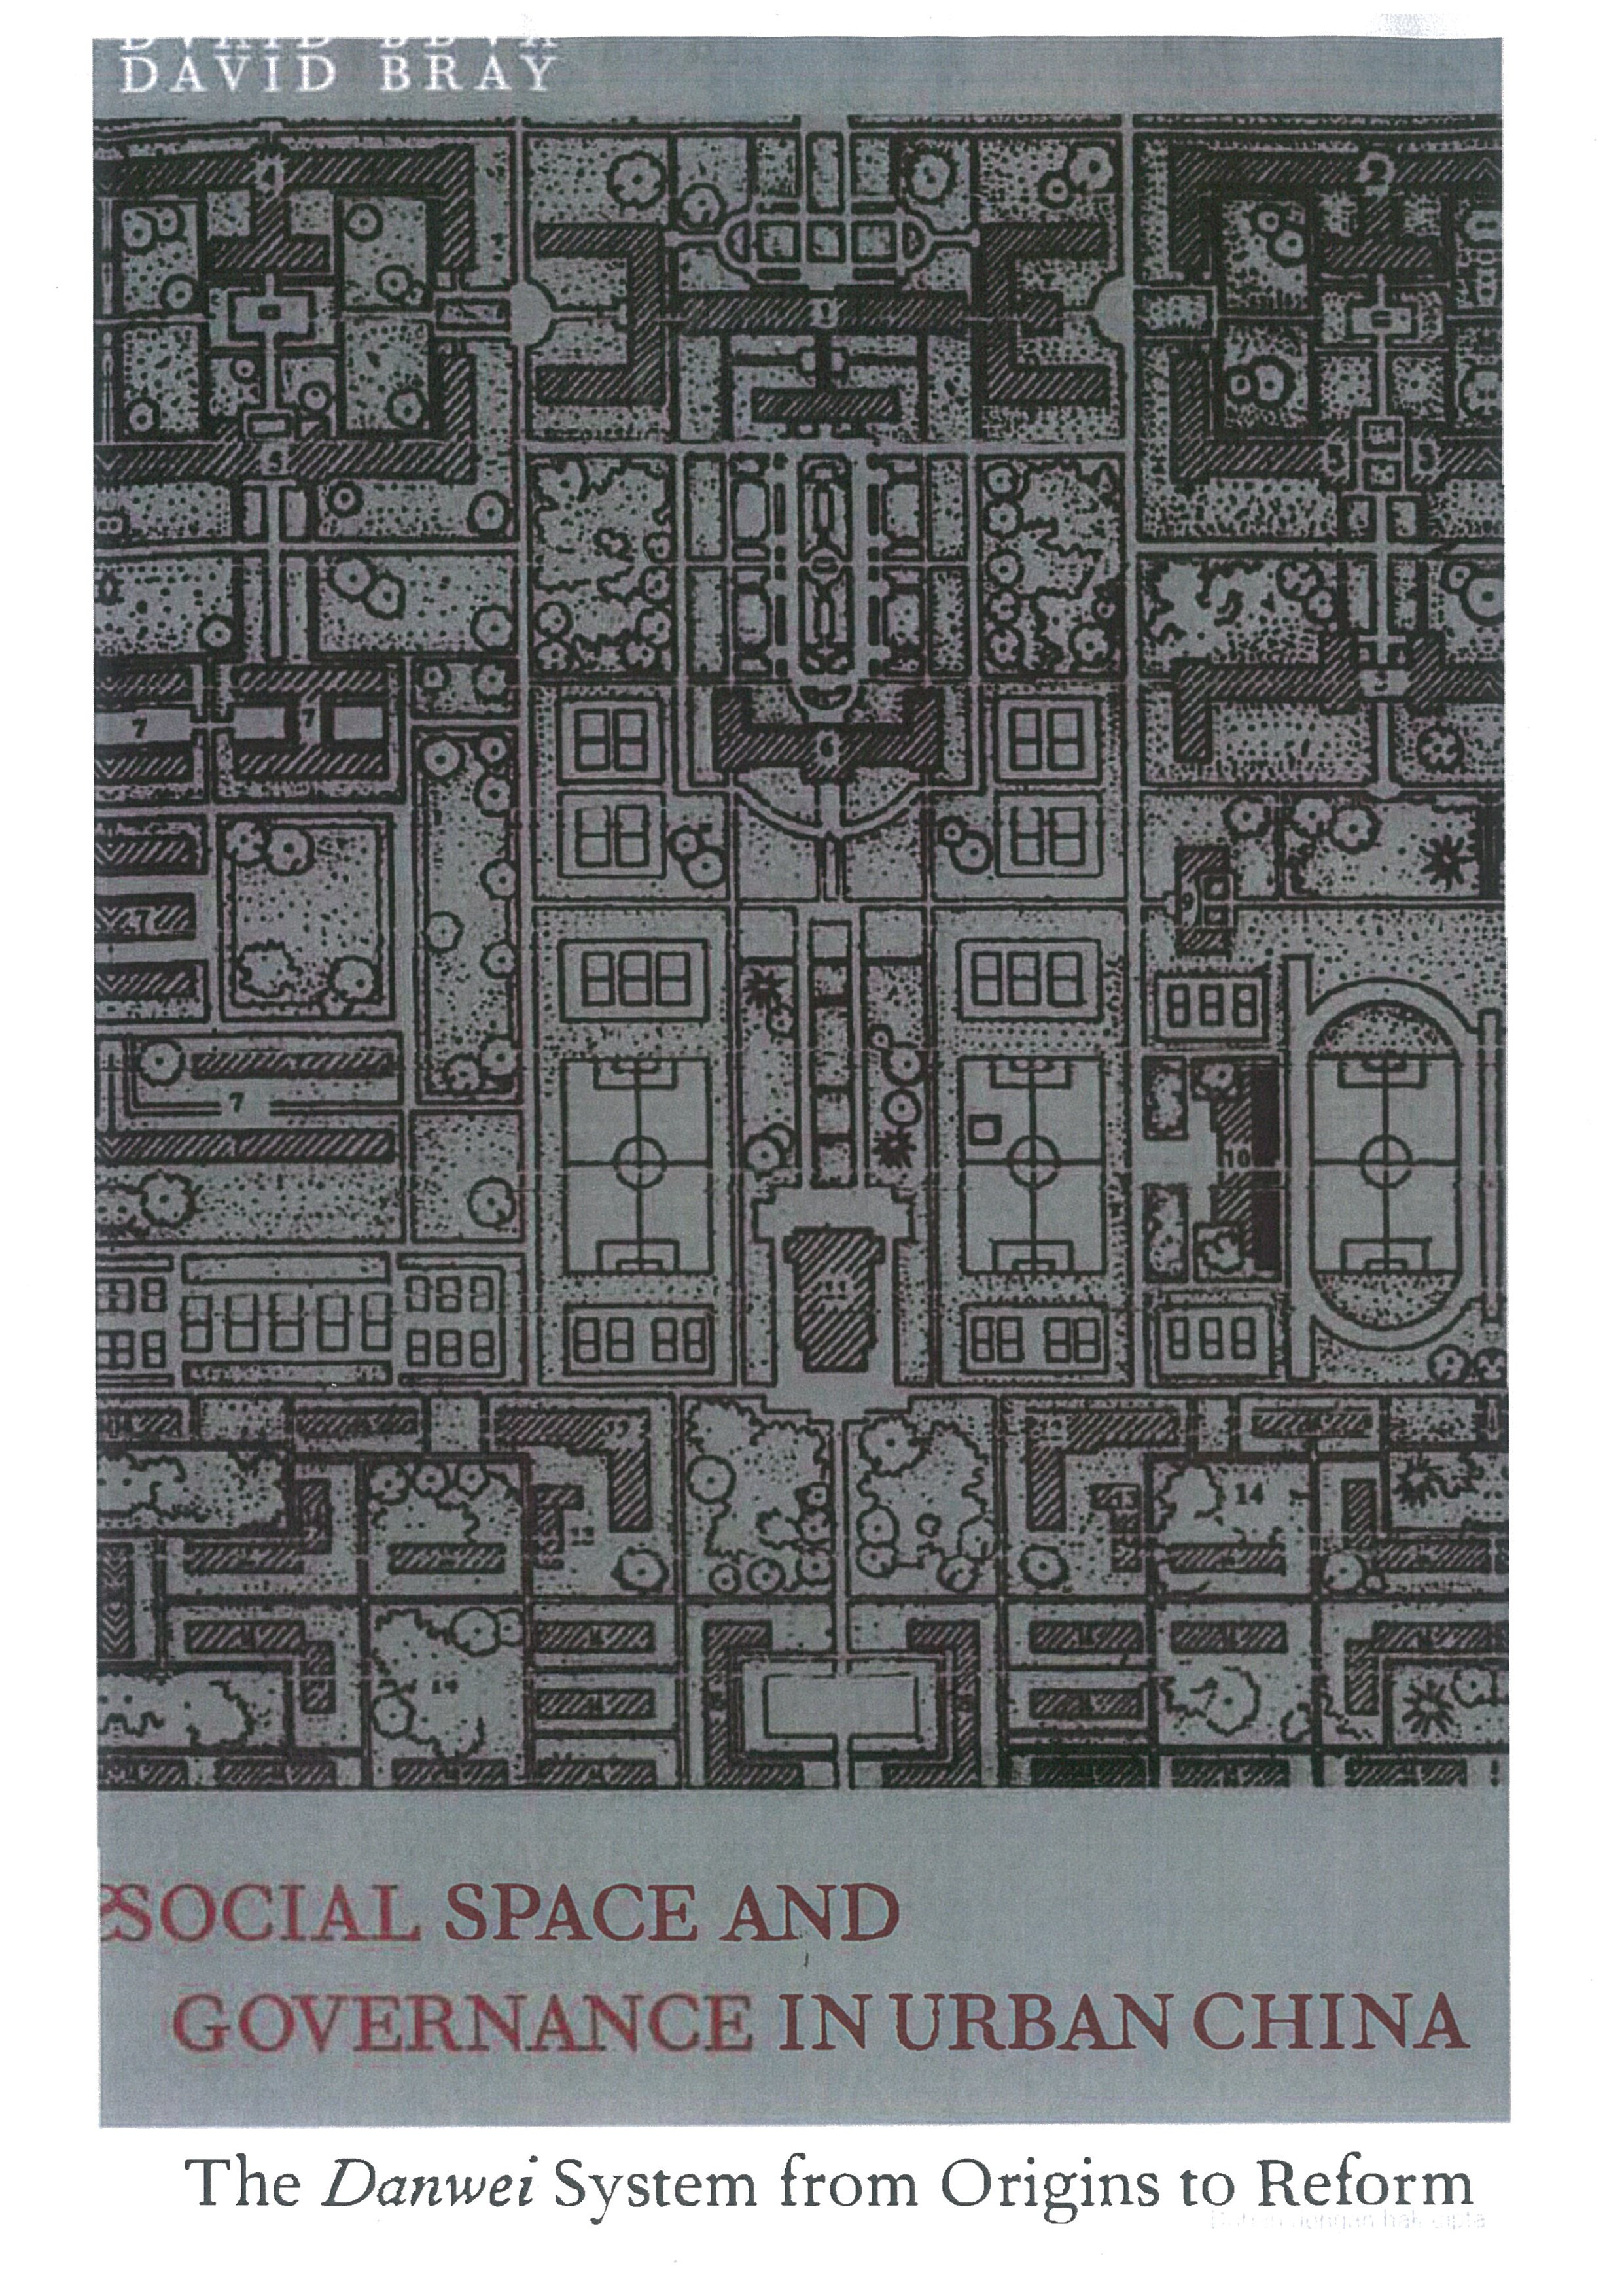 social space and governance in urban china.jpg